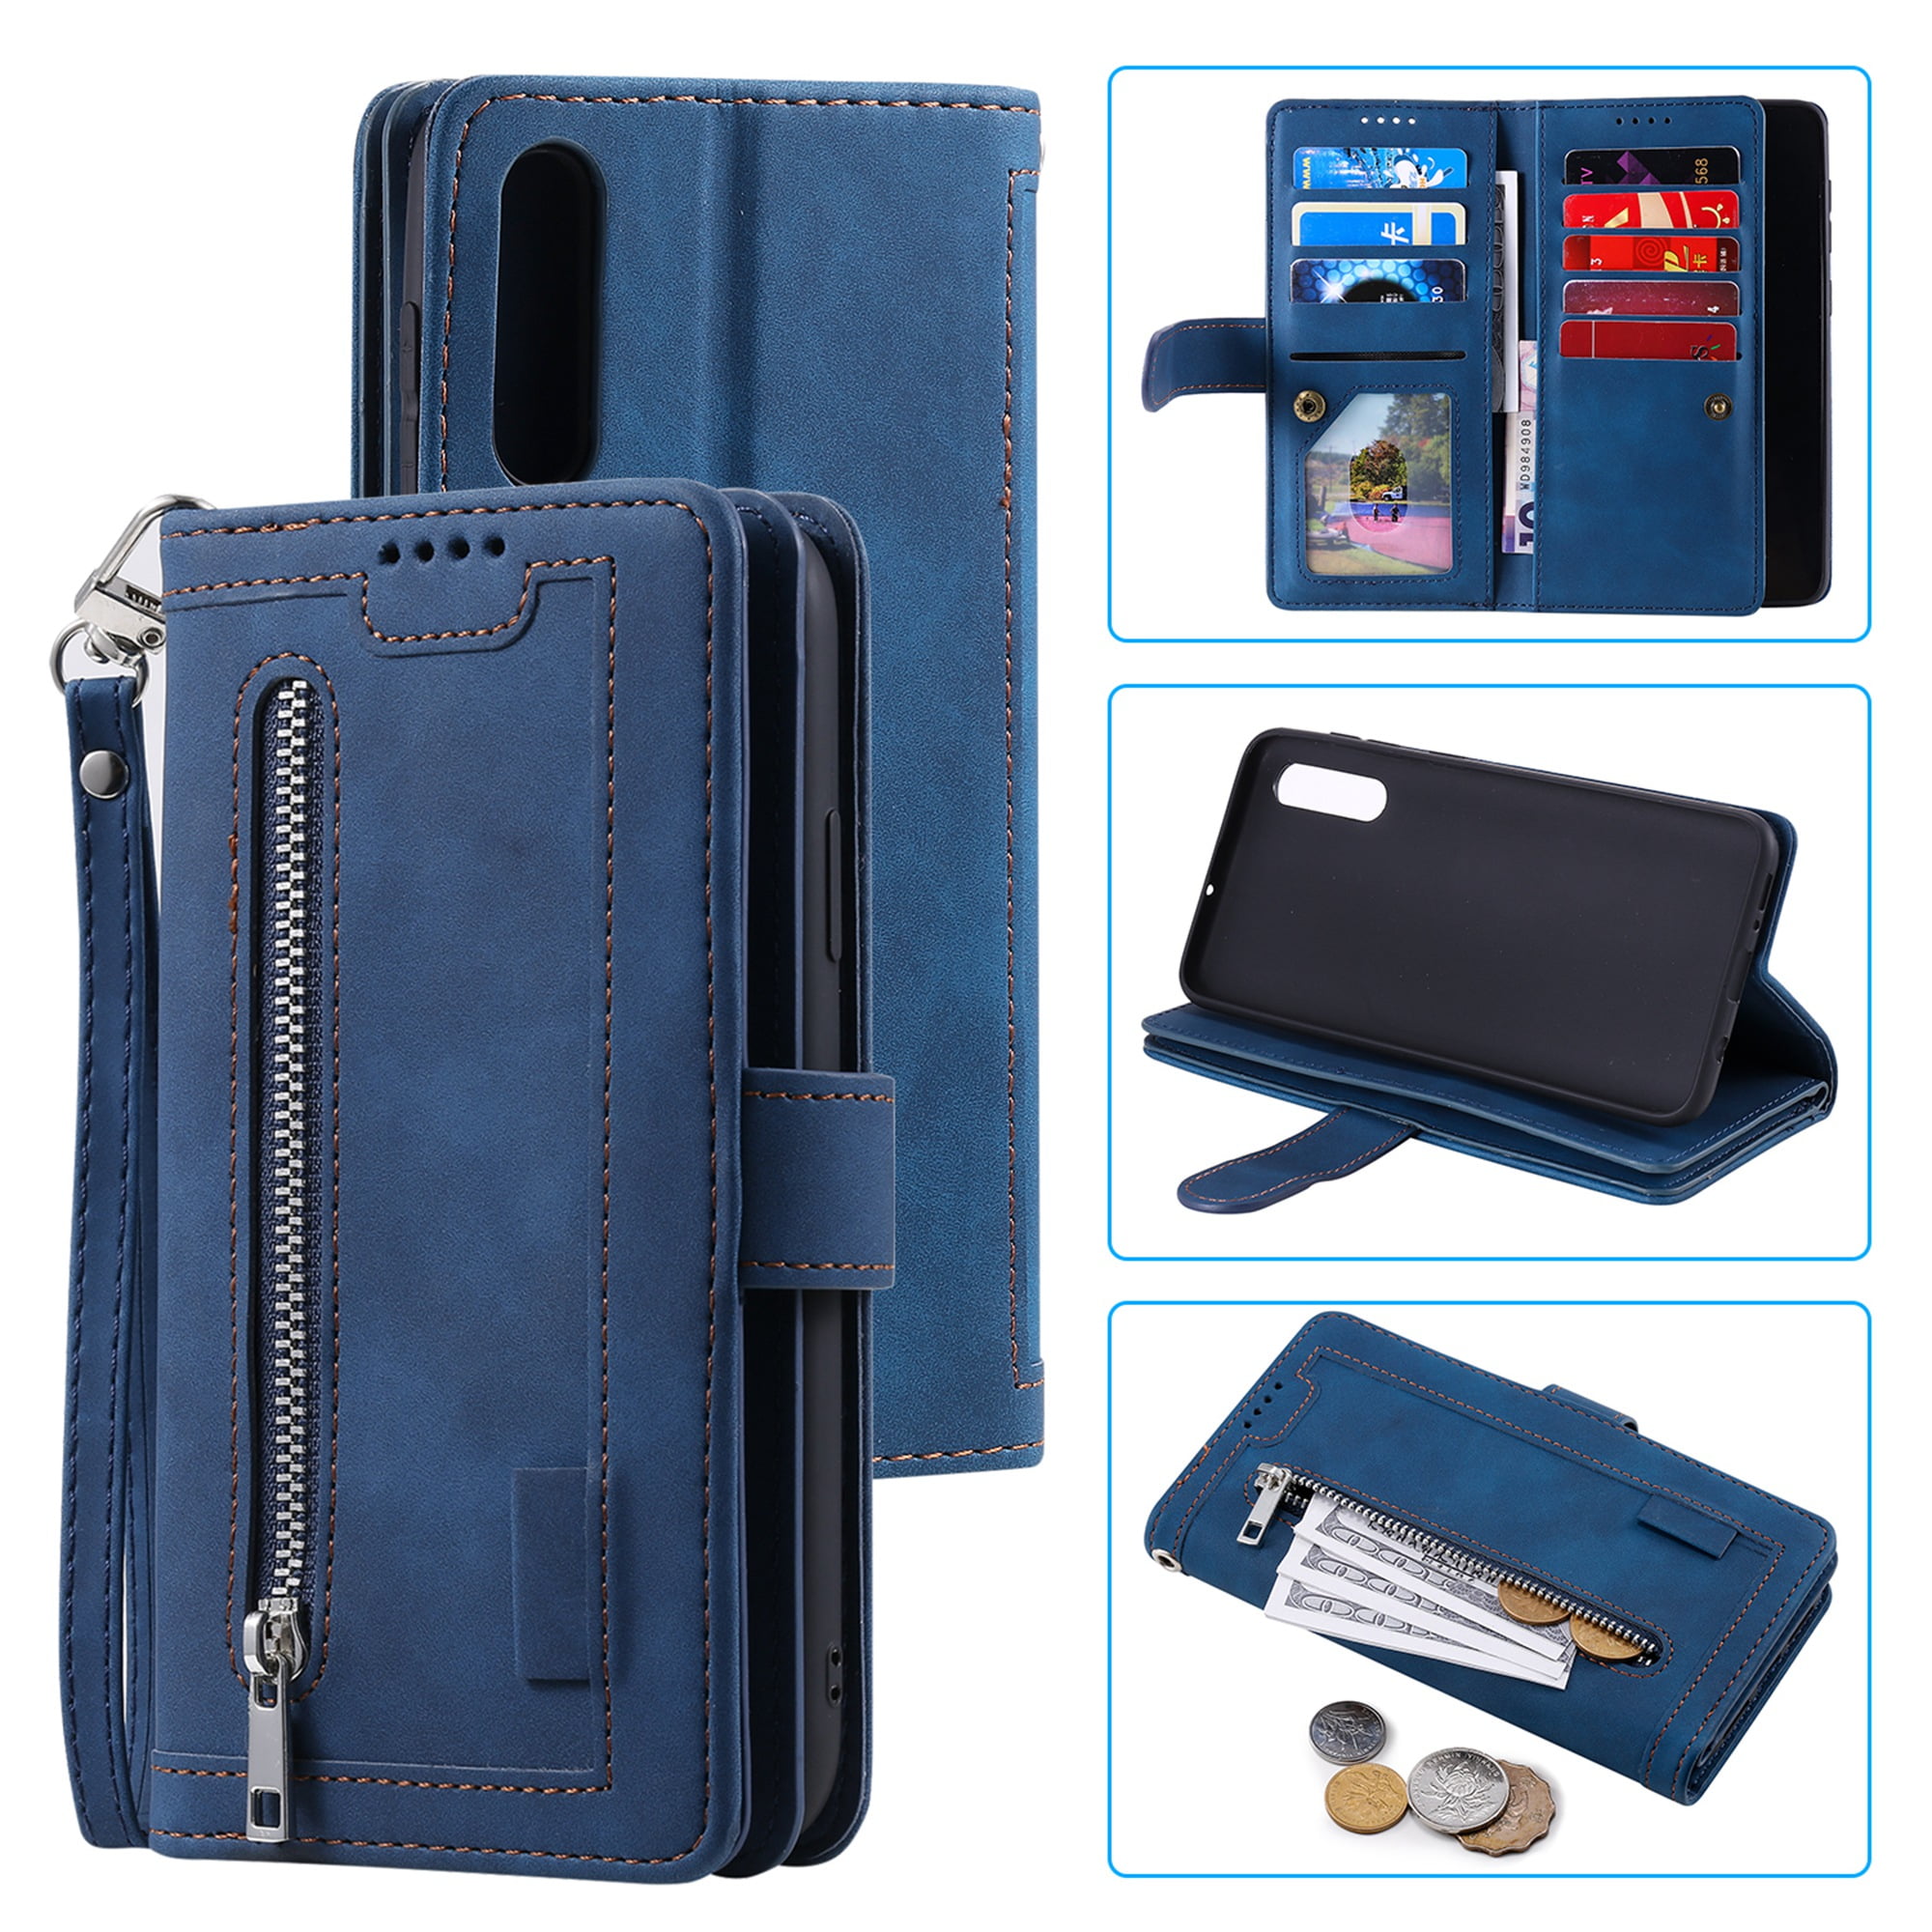 Blue Wallet Case for Samsung Galaxy A50 PU Leather Flip Cover Compatible with Samsung Galaxy A50